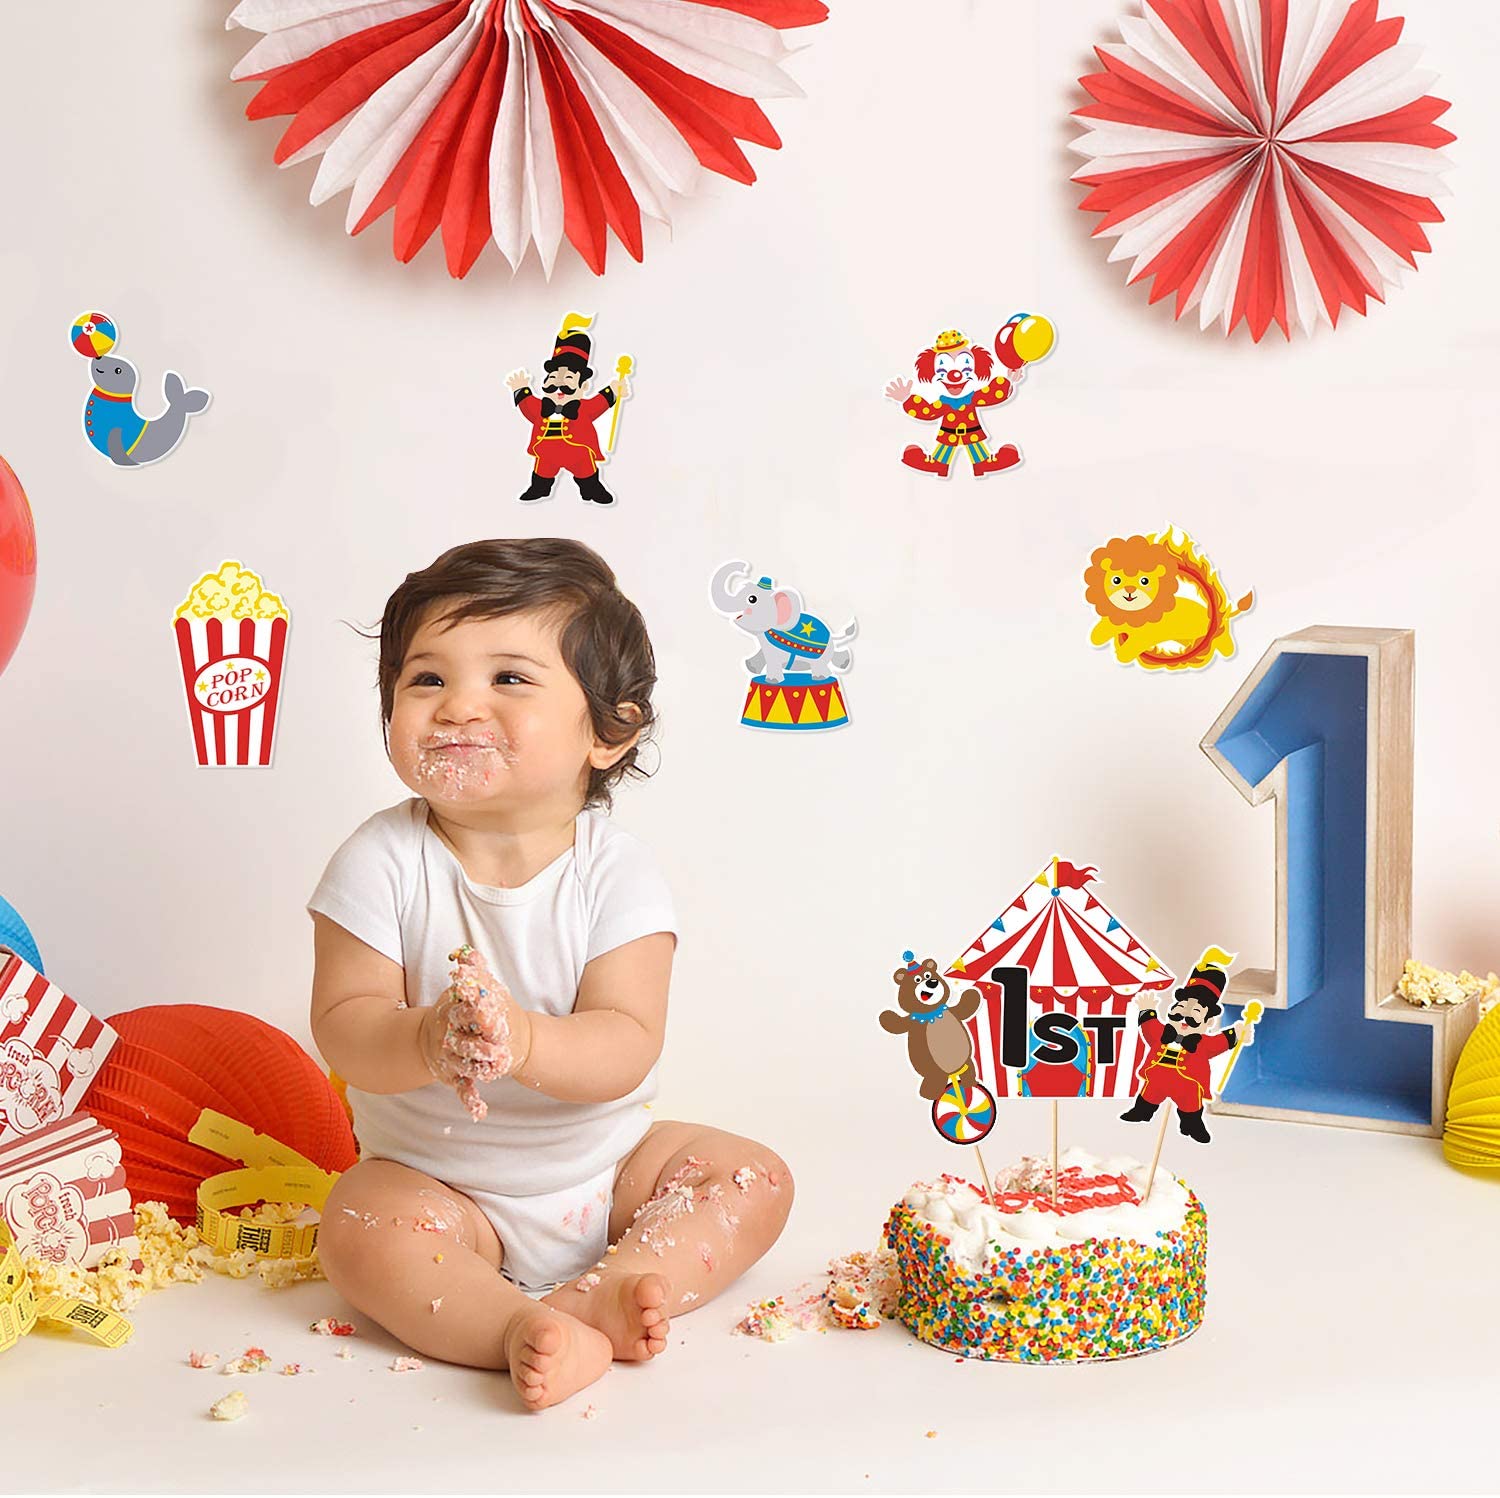 life's-a-circus-enjoy-the-party-cut-out-party-decorations